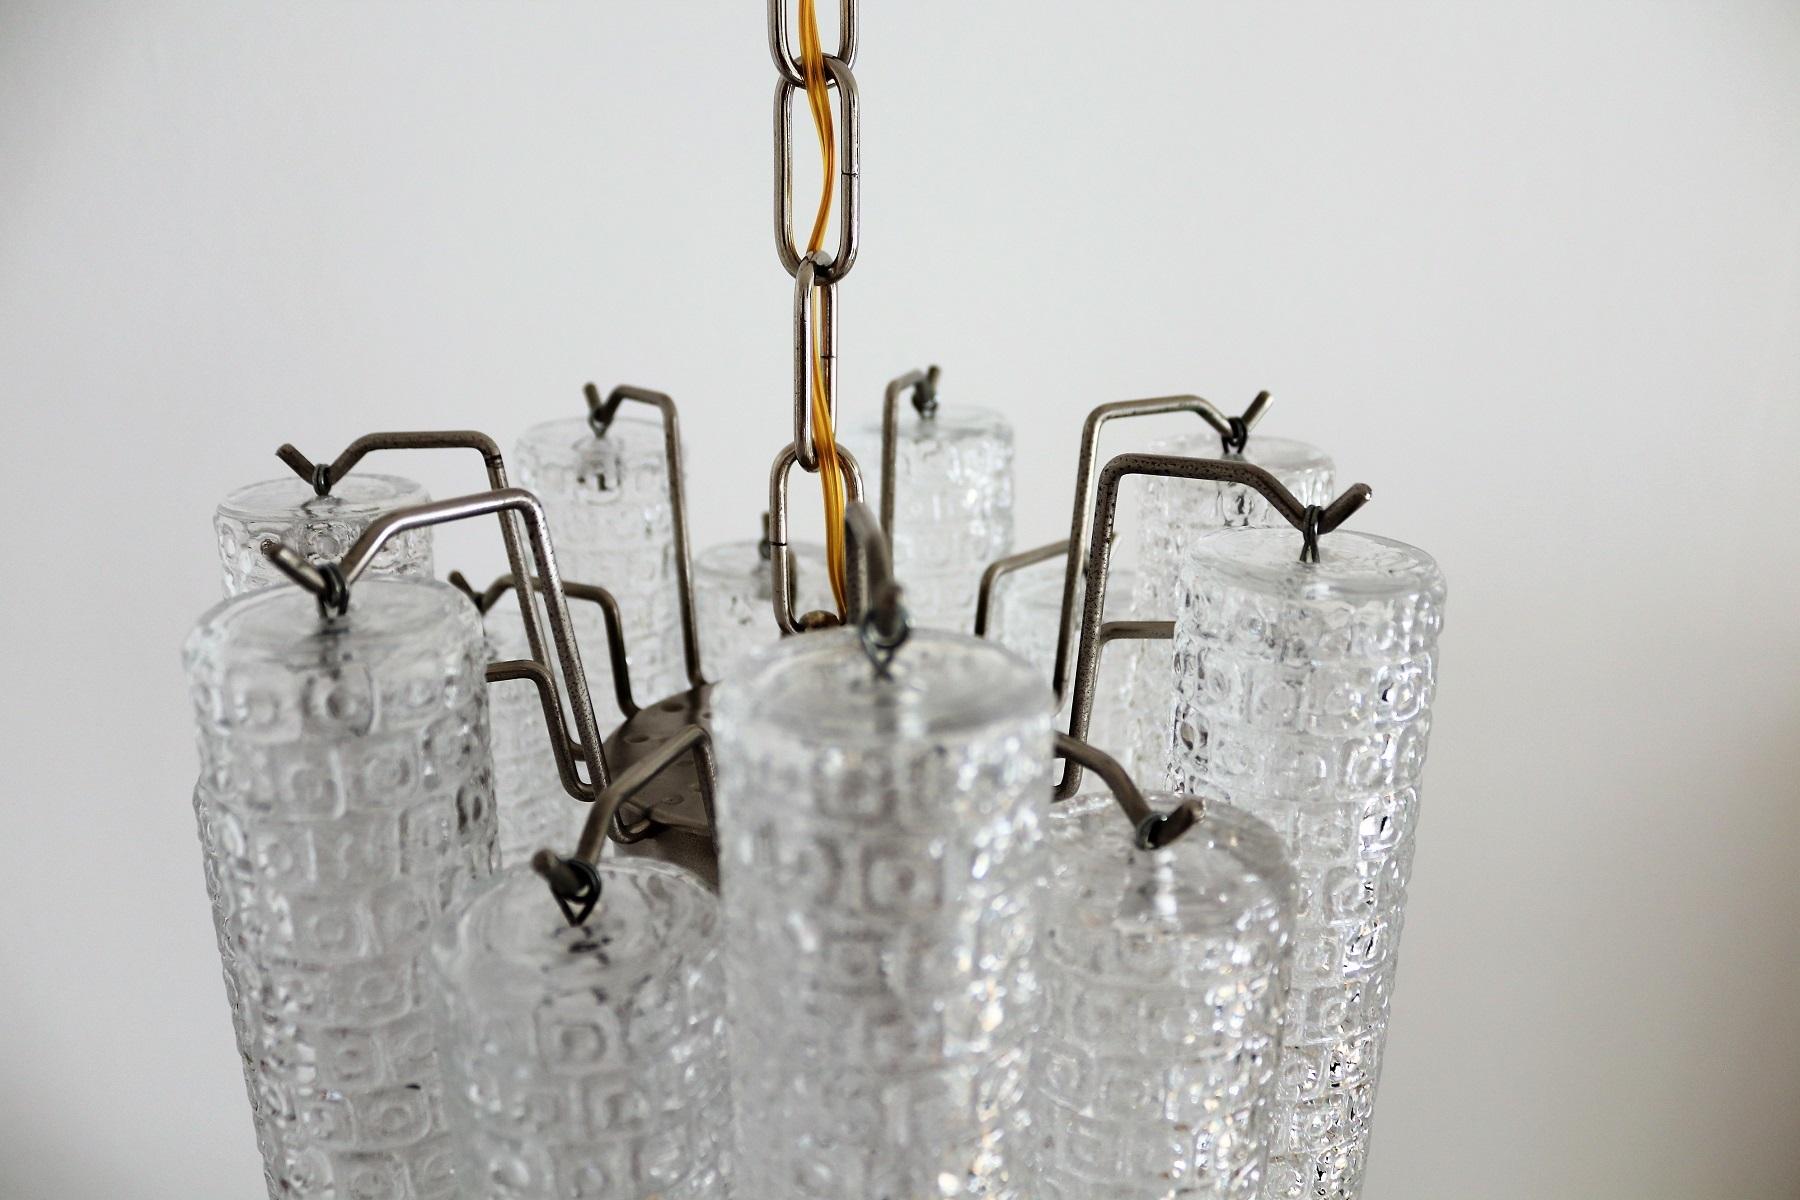 Italian Midcentury Murano Glass Crystal Tube Chandelier by Venini, 1950s For Sale 8